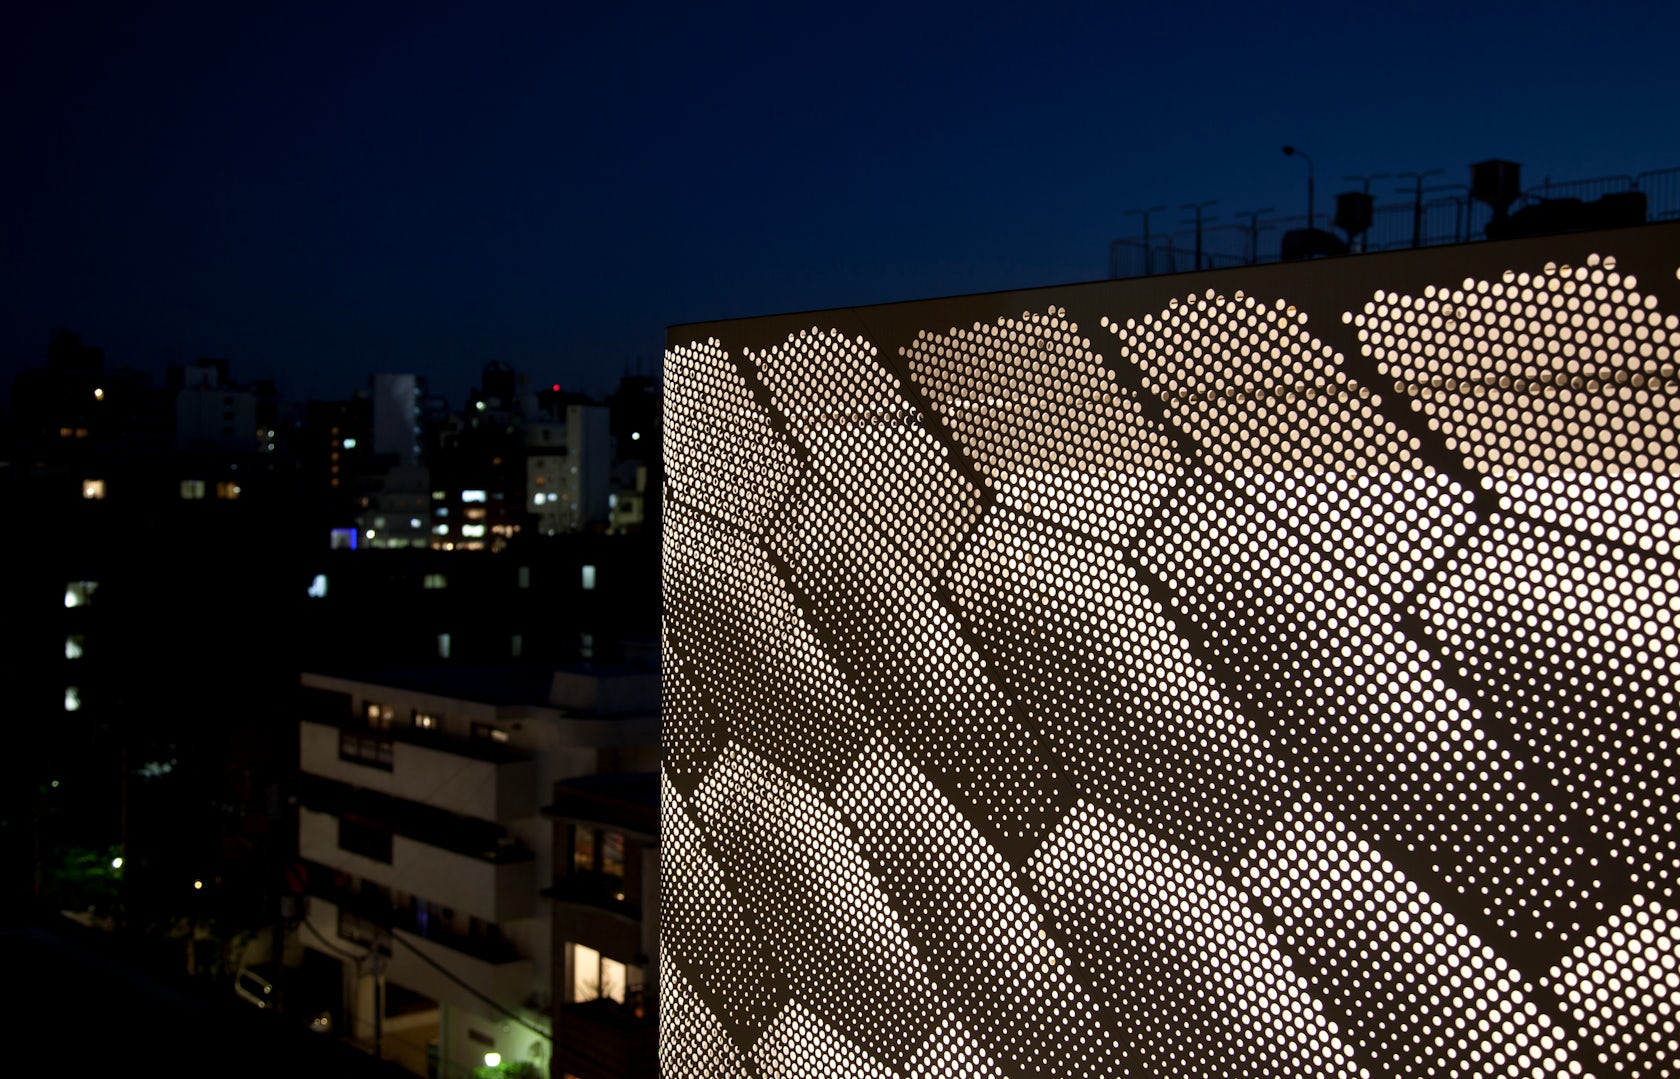 Louis Vuitton store Tokyo designed with perforated monogrammed facade